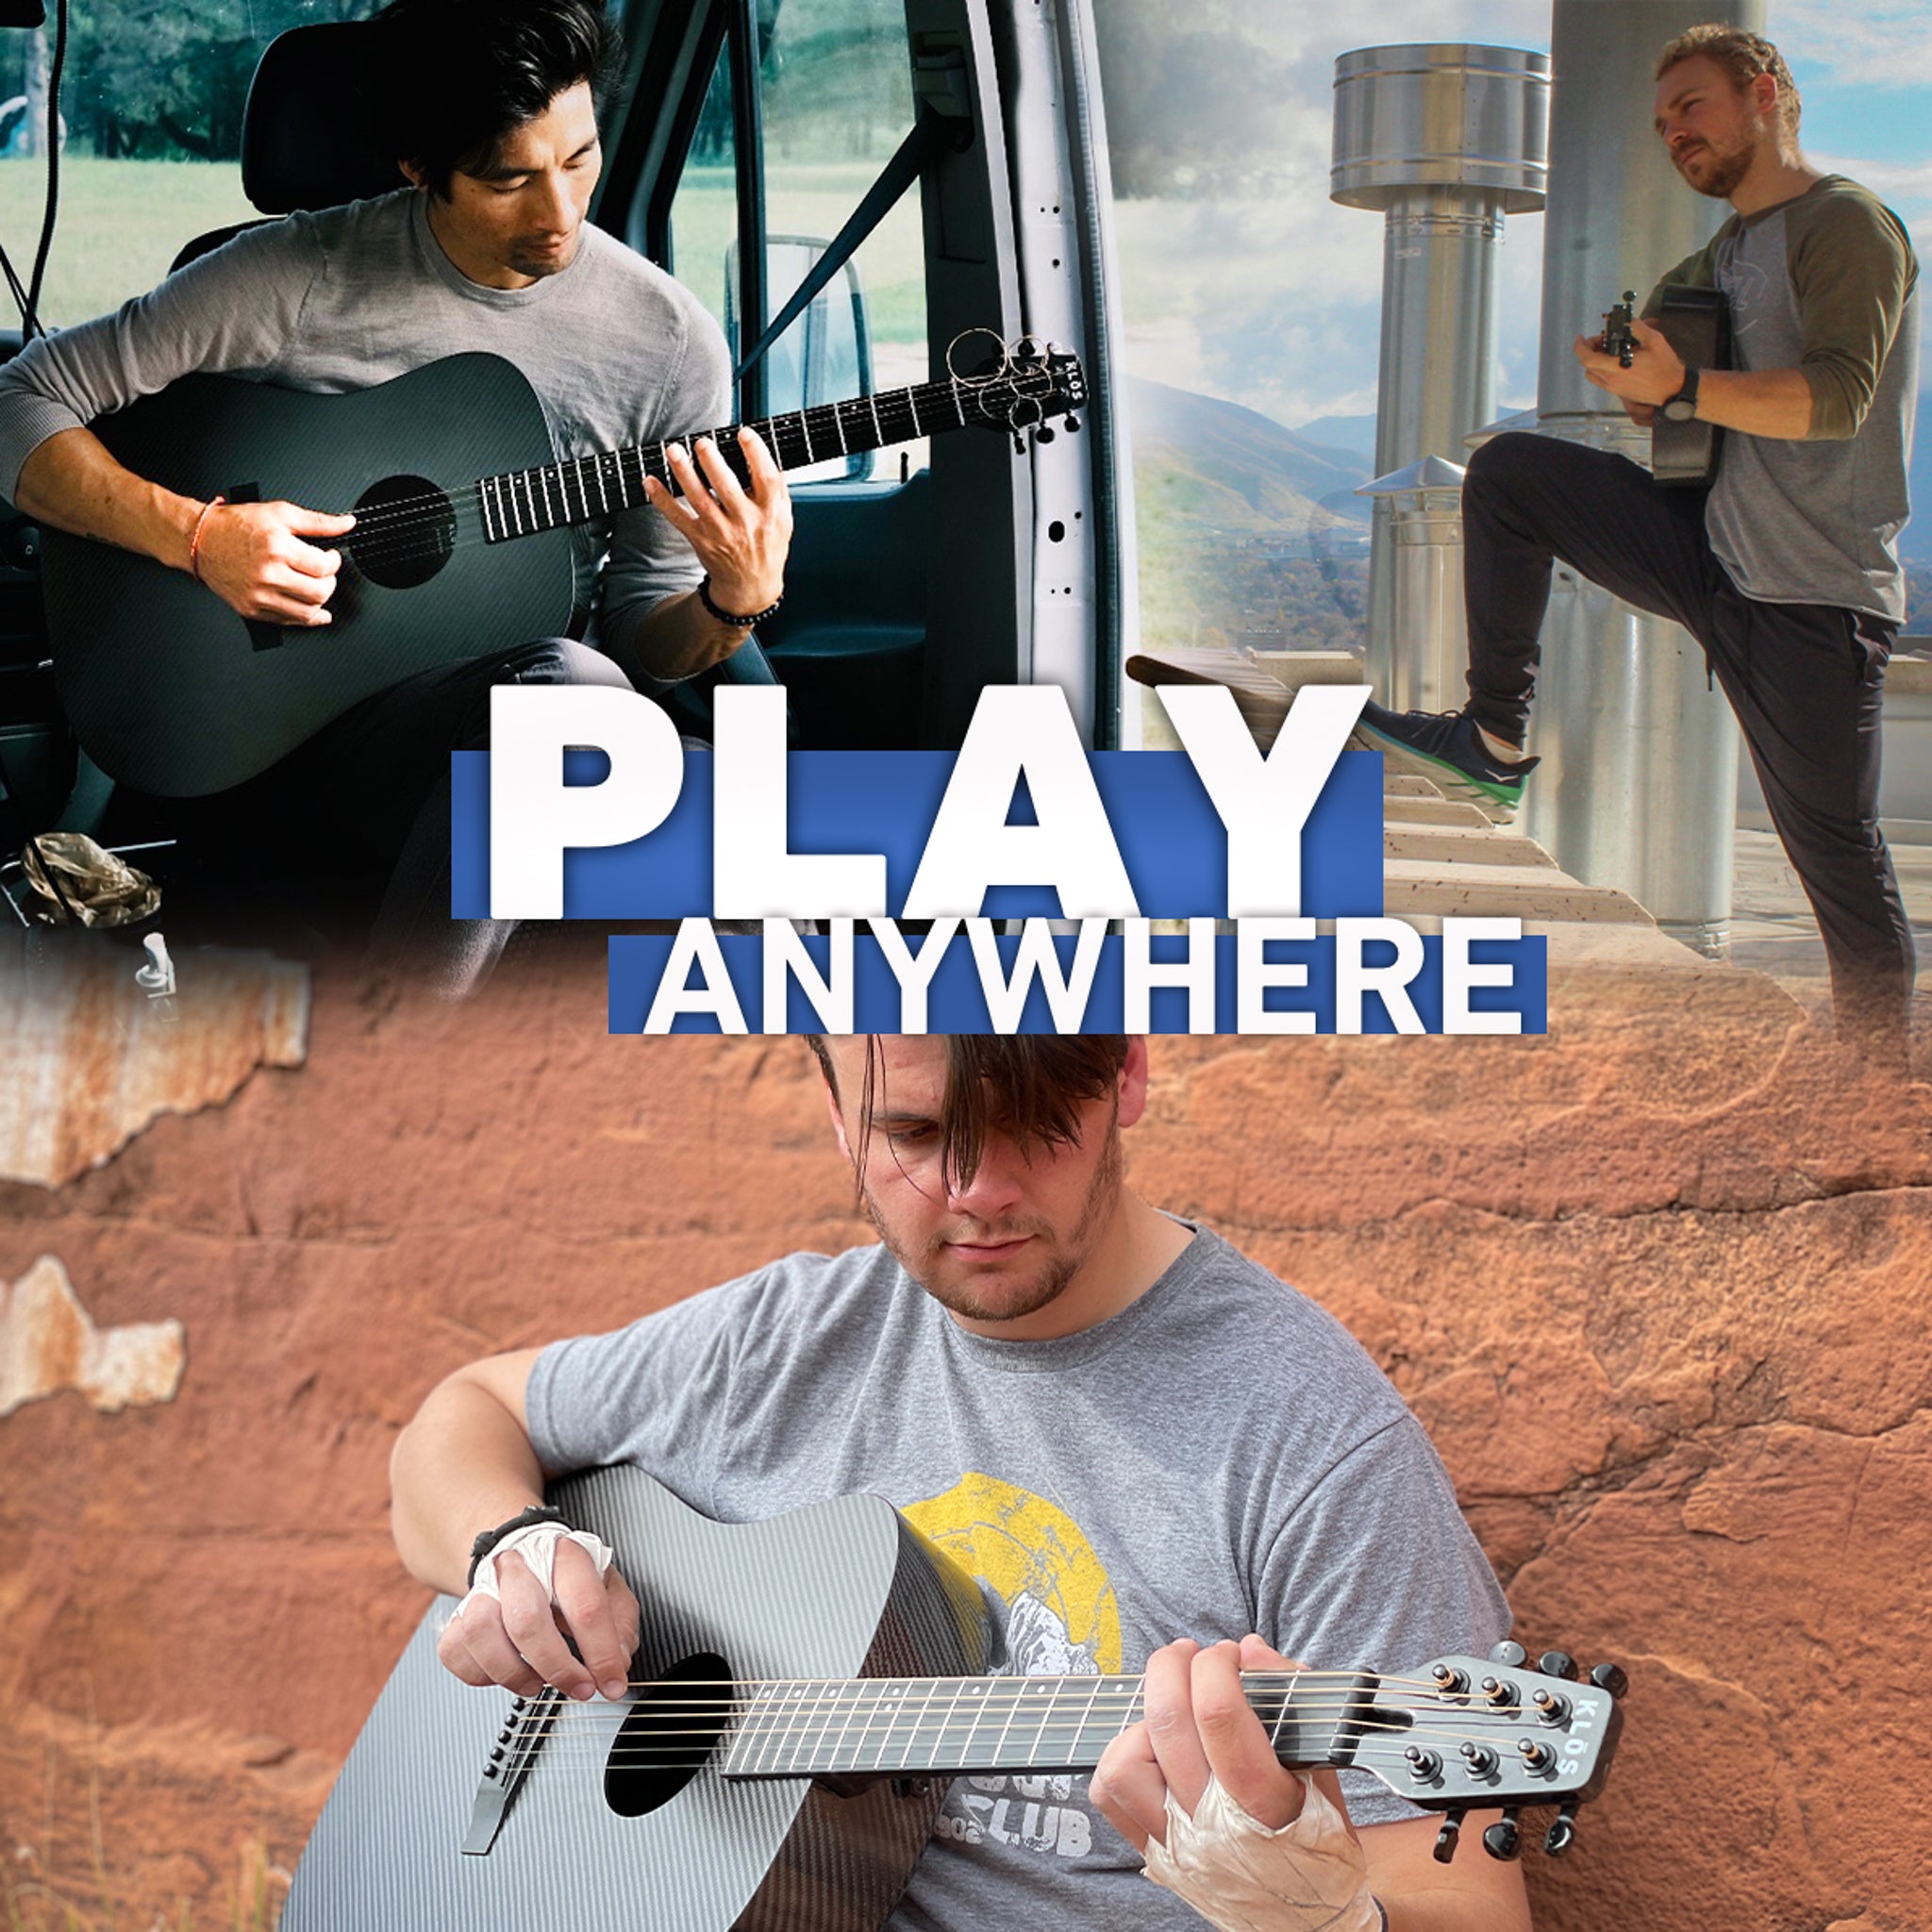 Play the KLOS Full Carbon Full Size Guitar anywhere